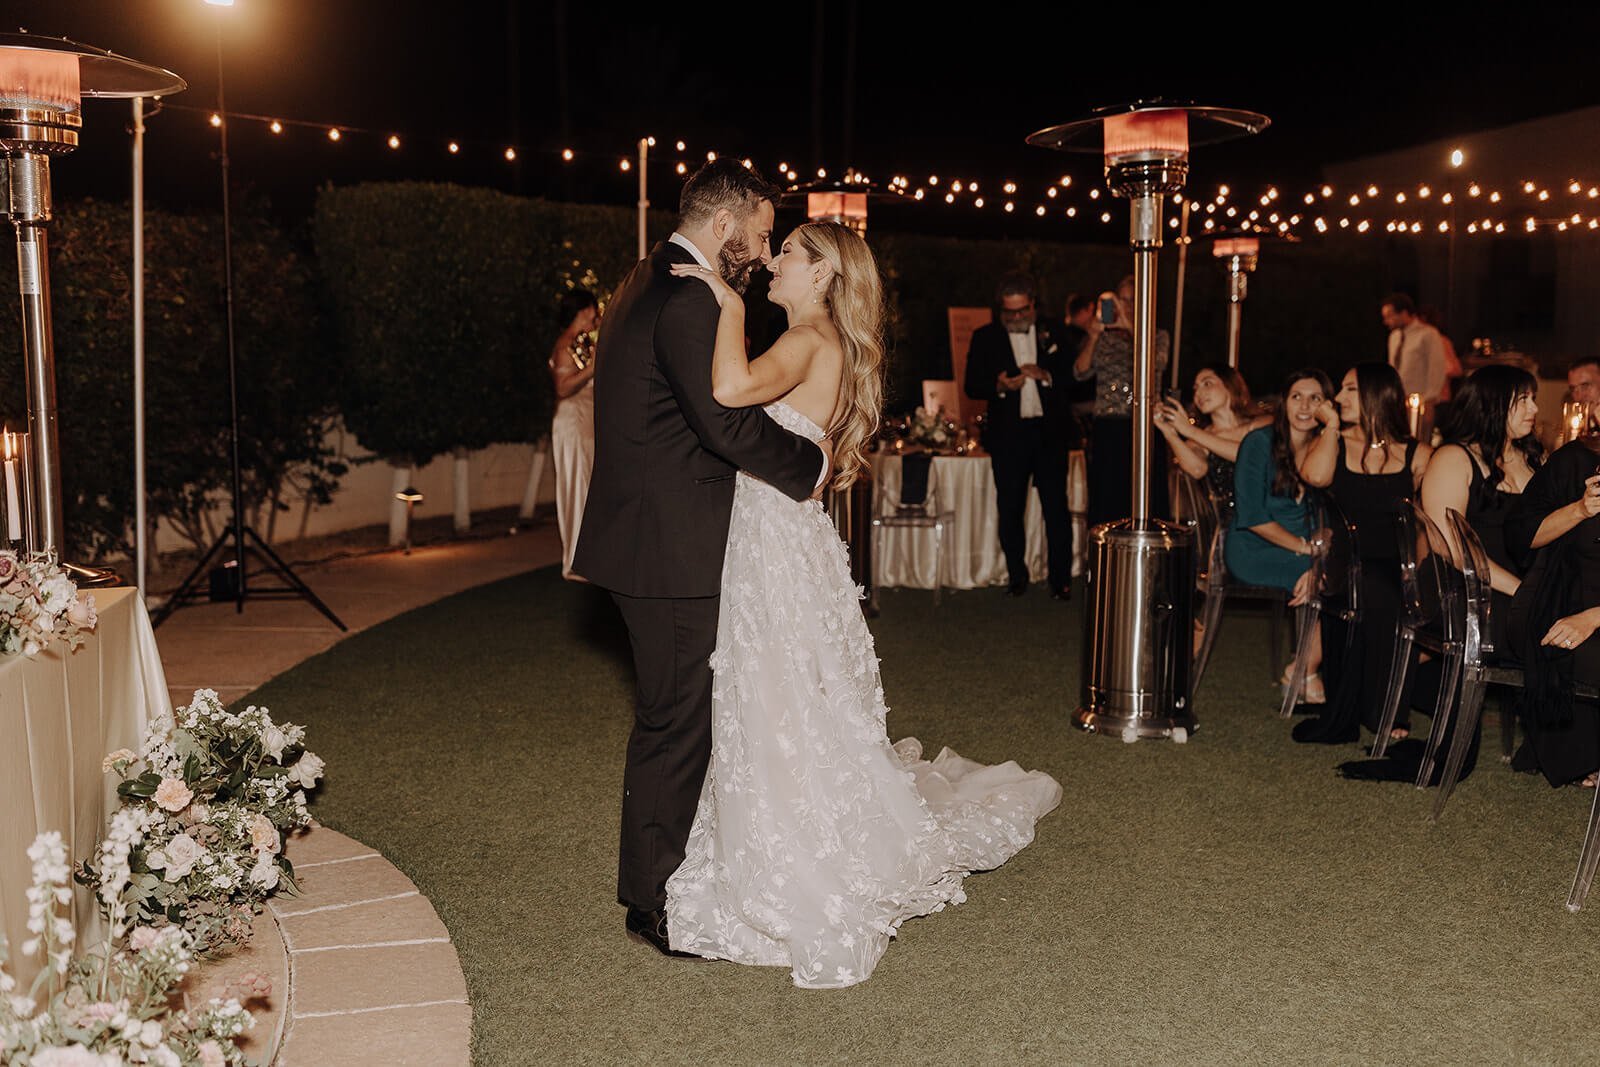 Bride and groom first dance outdoors under lights at luxury Scottsdale wedding